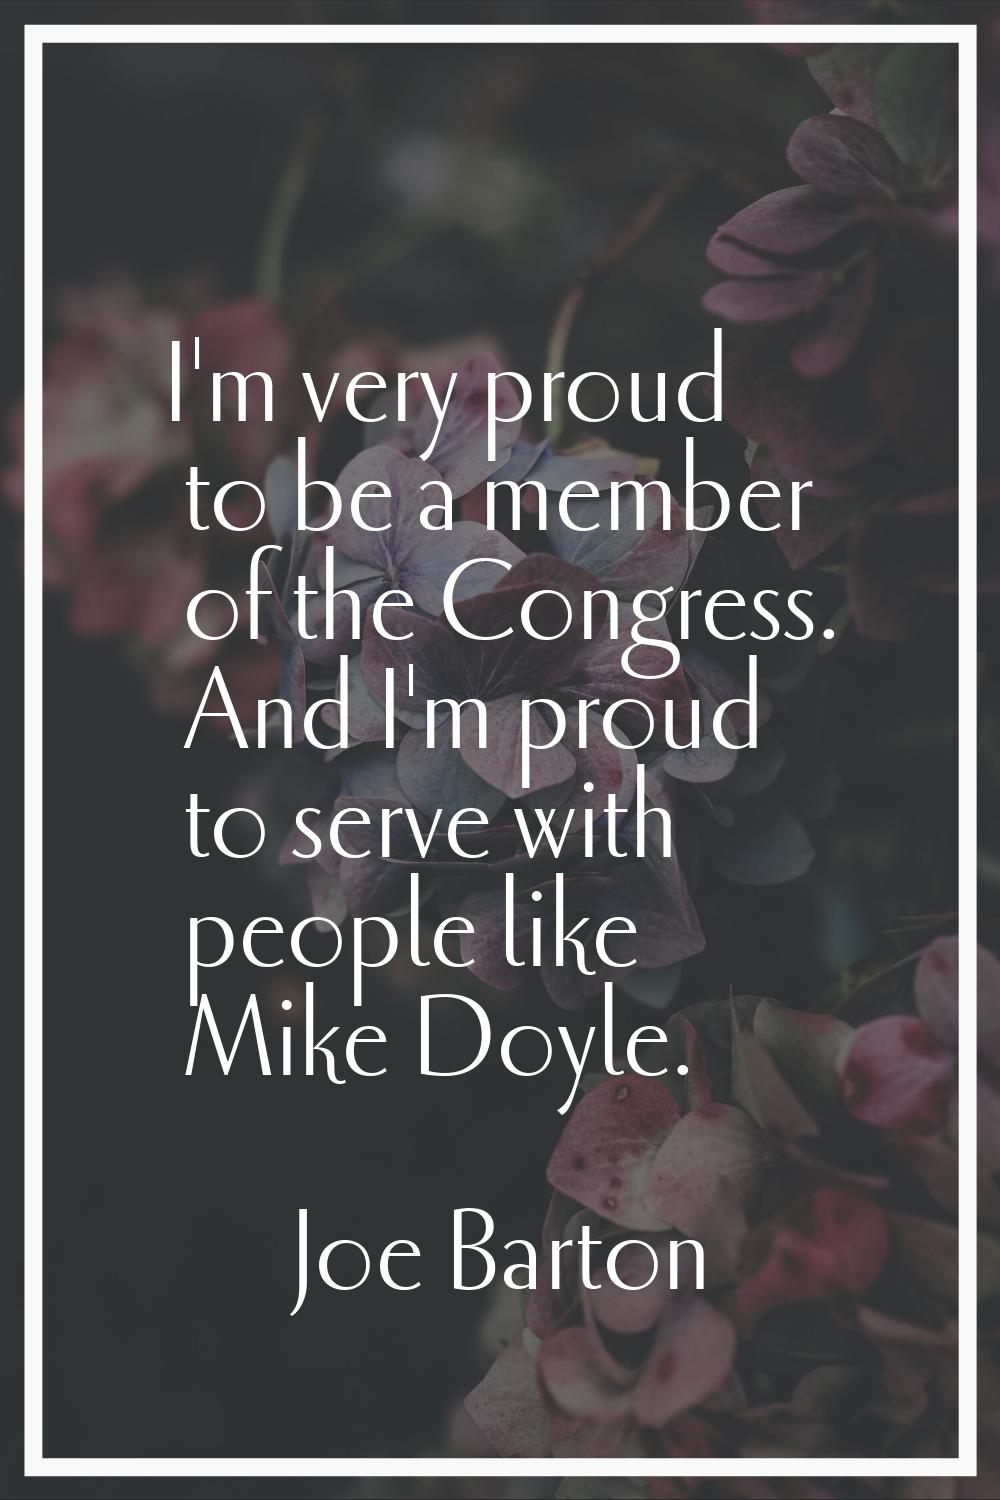 I'm very proud to be a member of the Congress. And I'm proud to serve with people like Mike Doyle.